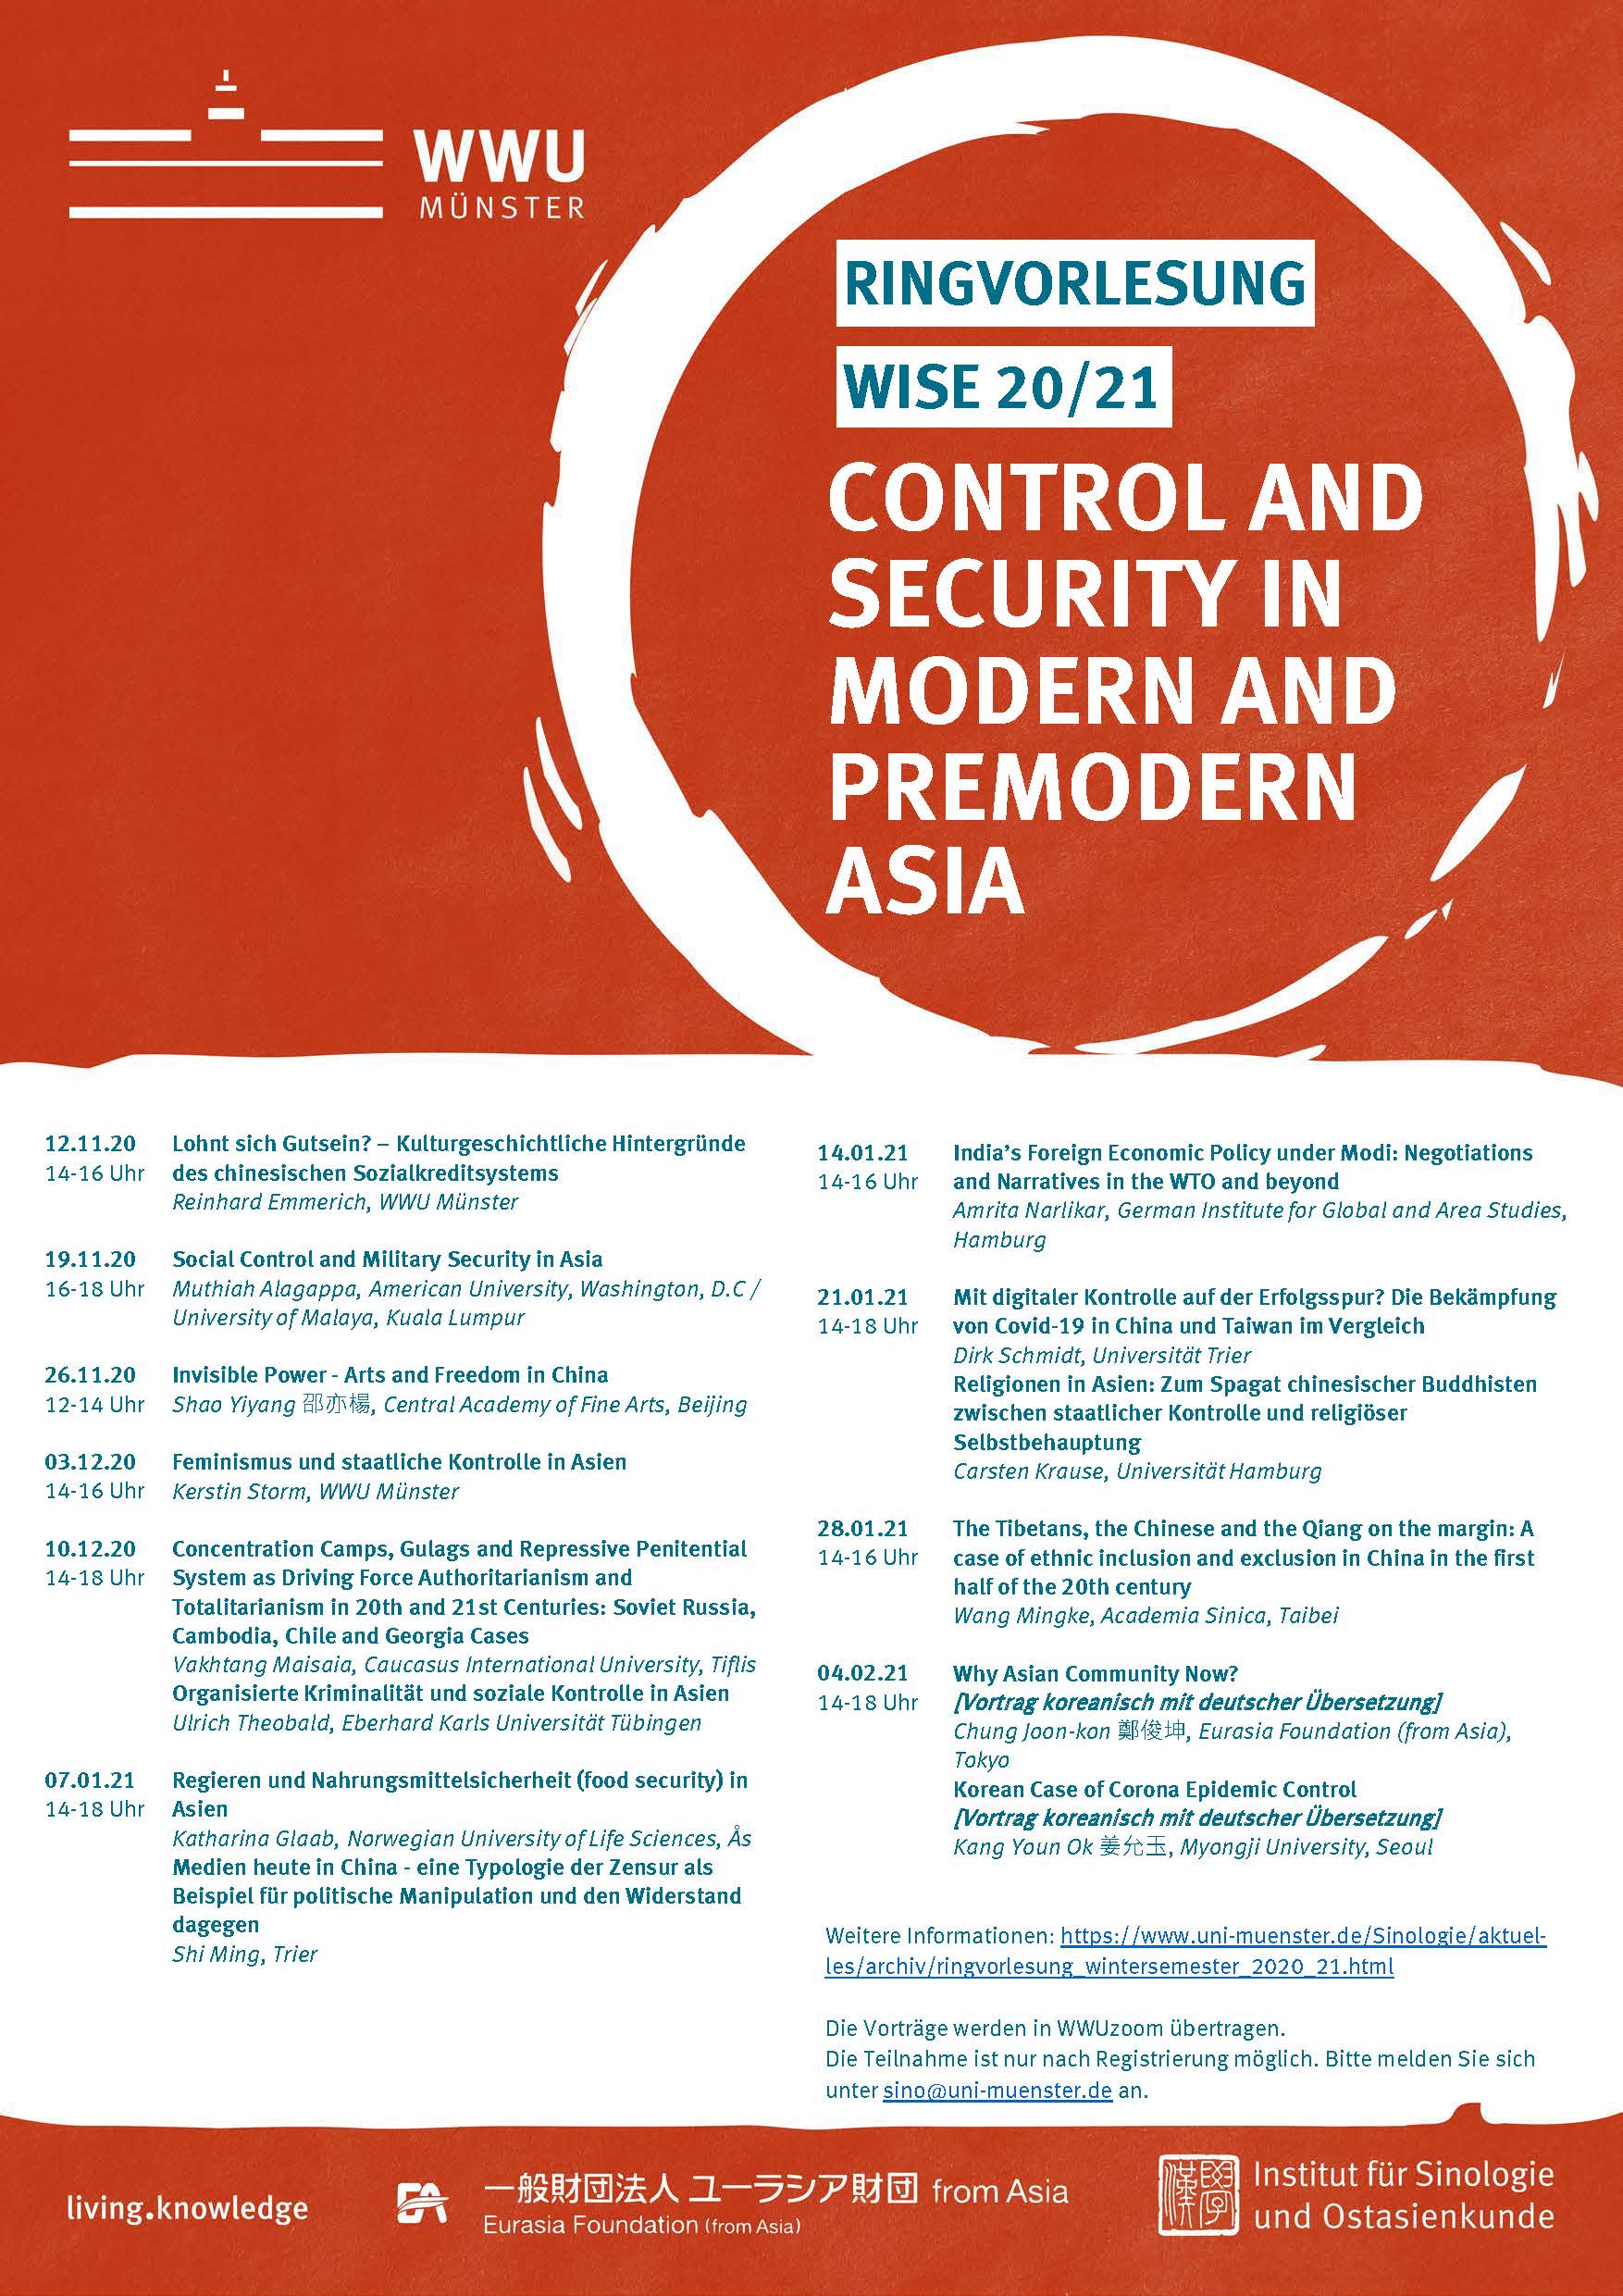 Plakat zur Ringvorlesung "Control and Security in Modern and Premodern Asia"